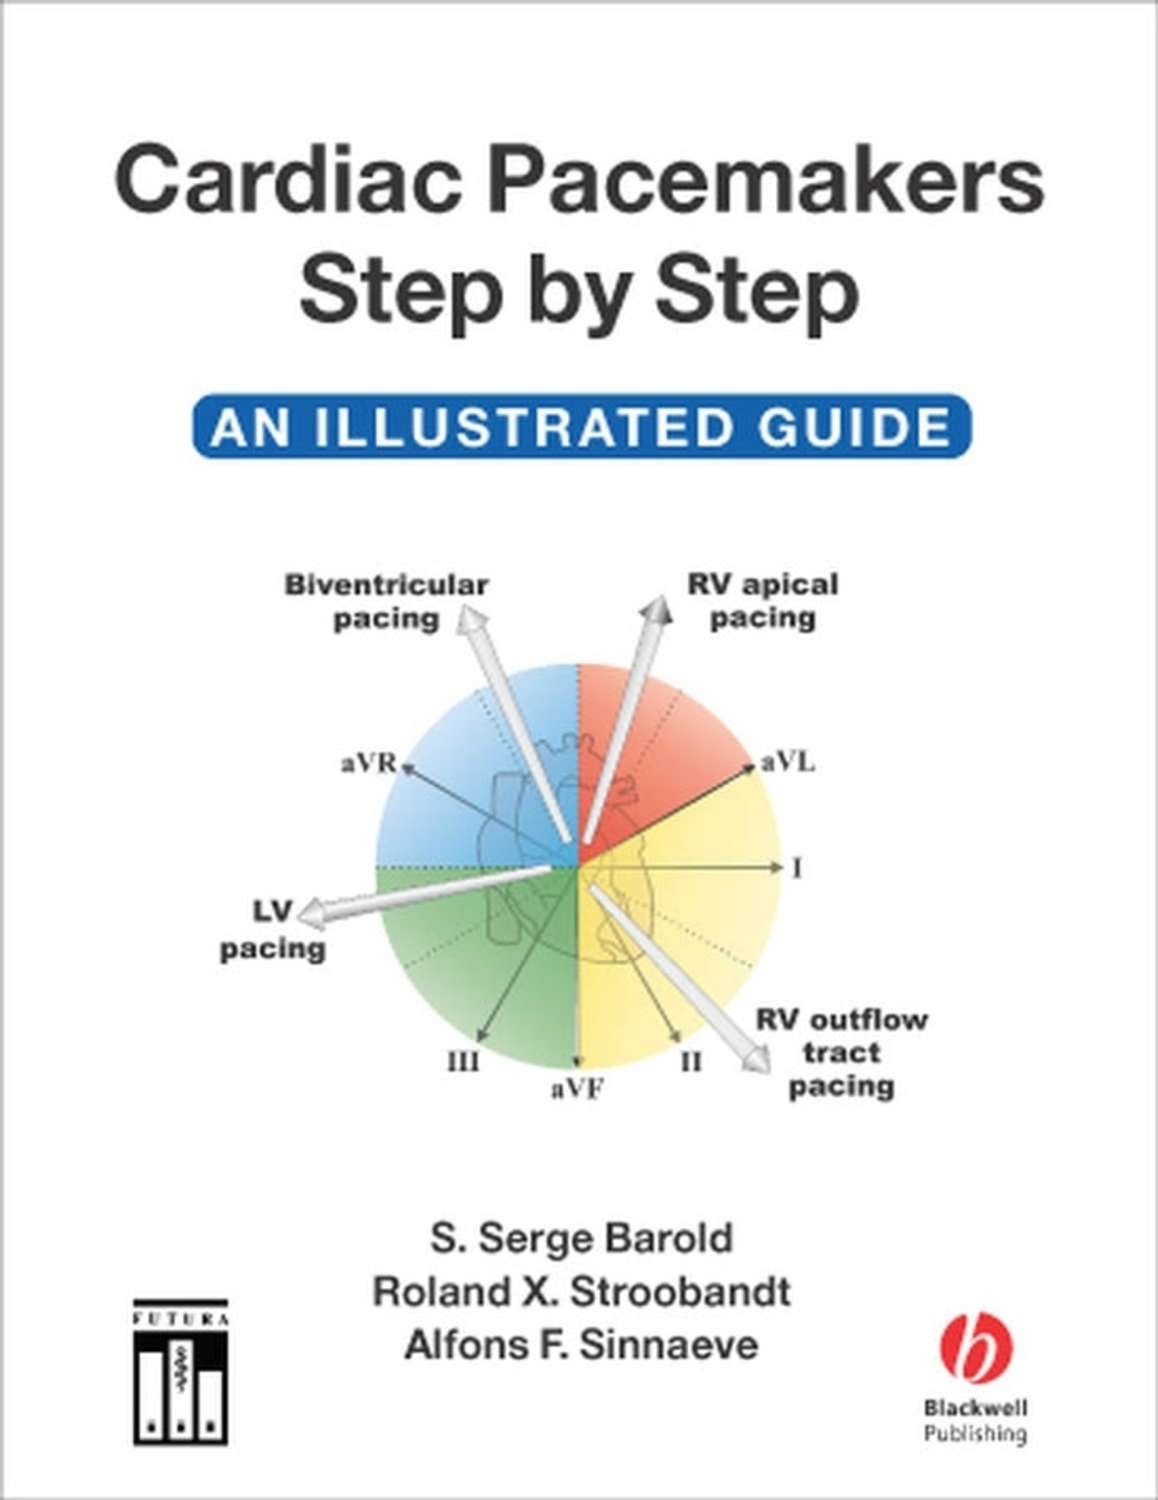 cardiac pacemakers step by step an illustrated guide free download